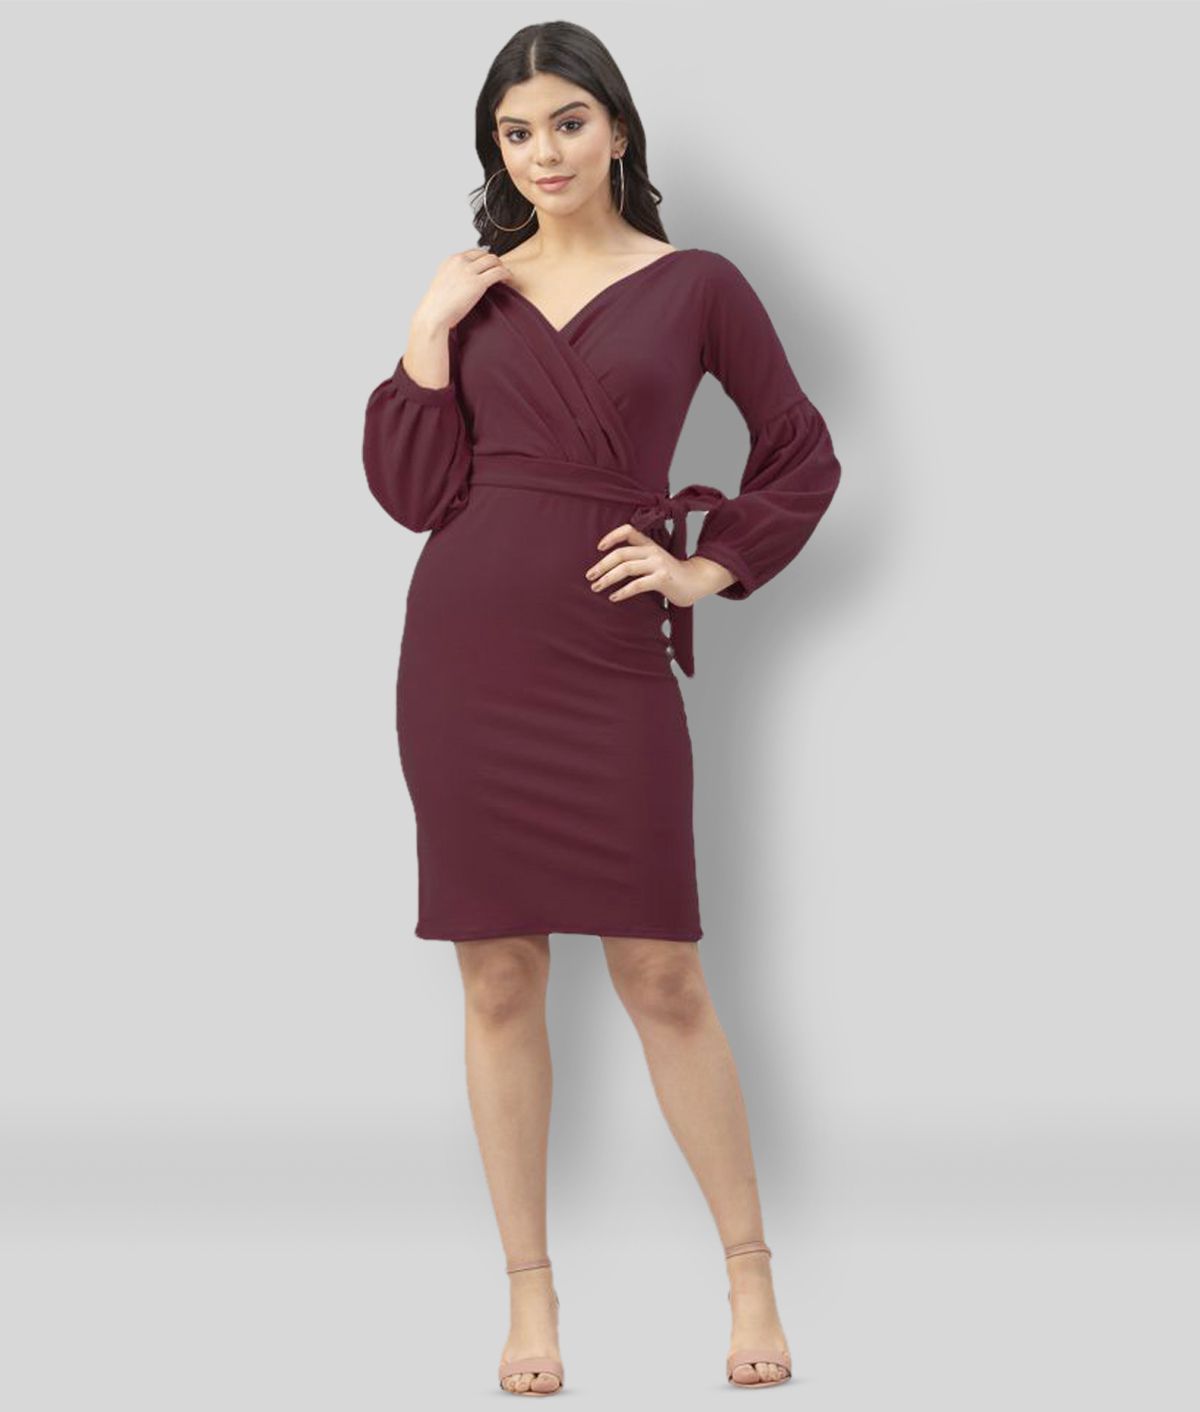     			Selvia - Brown Cotton Lycra Women's Bodycon Dress ( Pack of 1 )